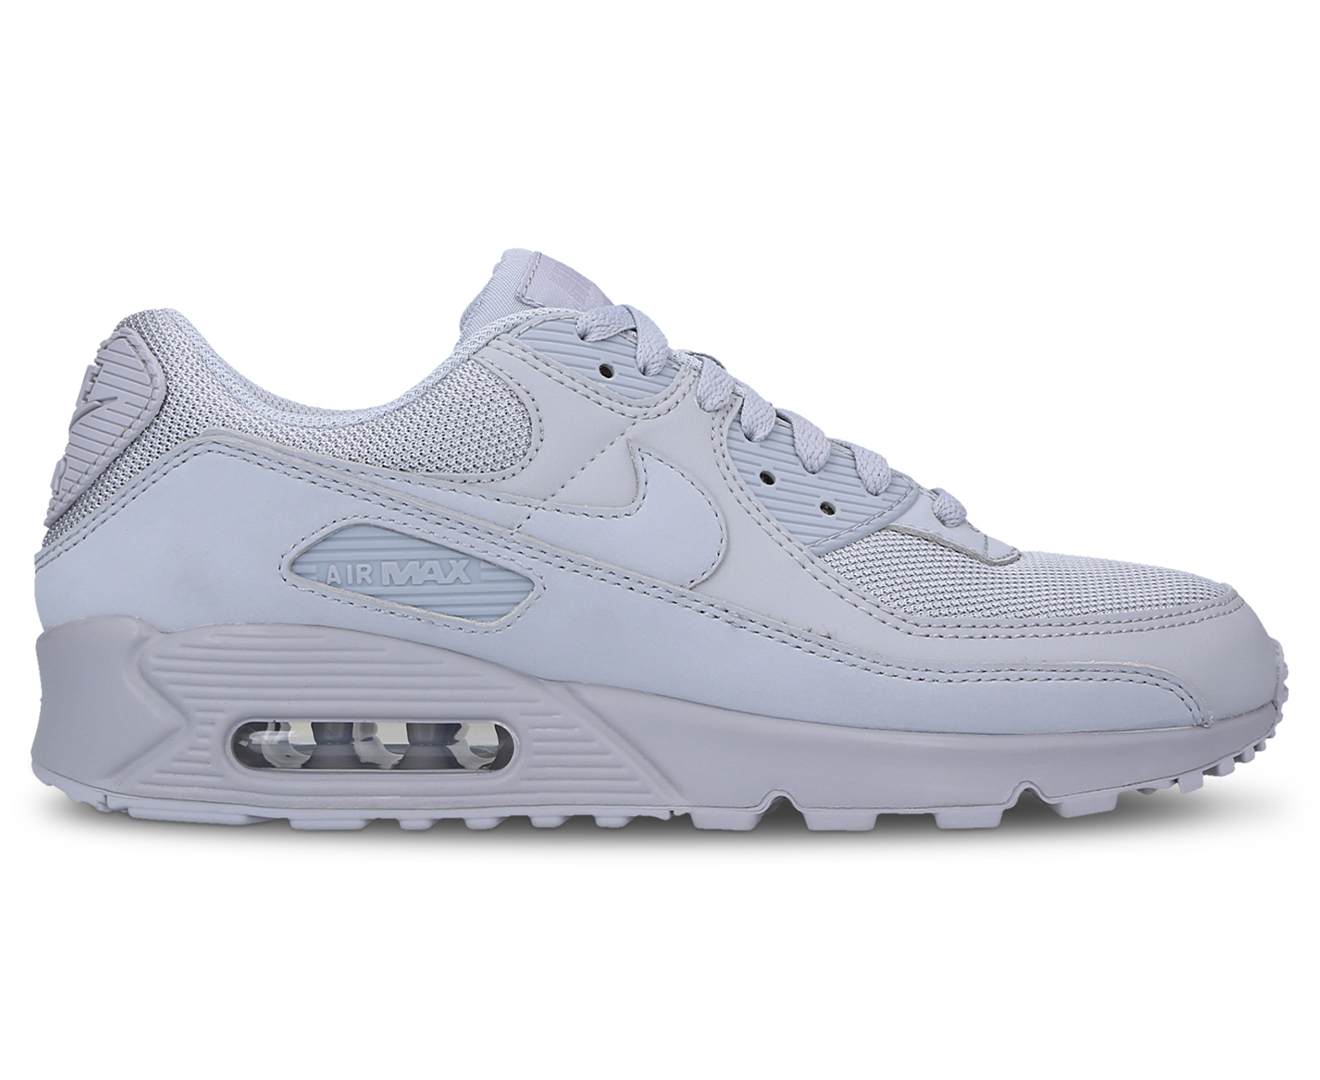 Nike Men's Air Max 90 Sneakers - Wolf Grey | Catch.co.nz